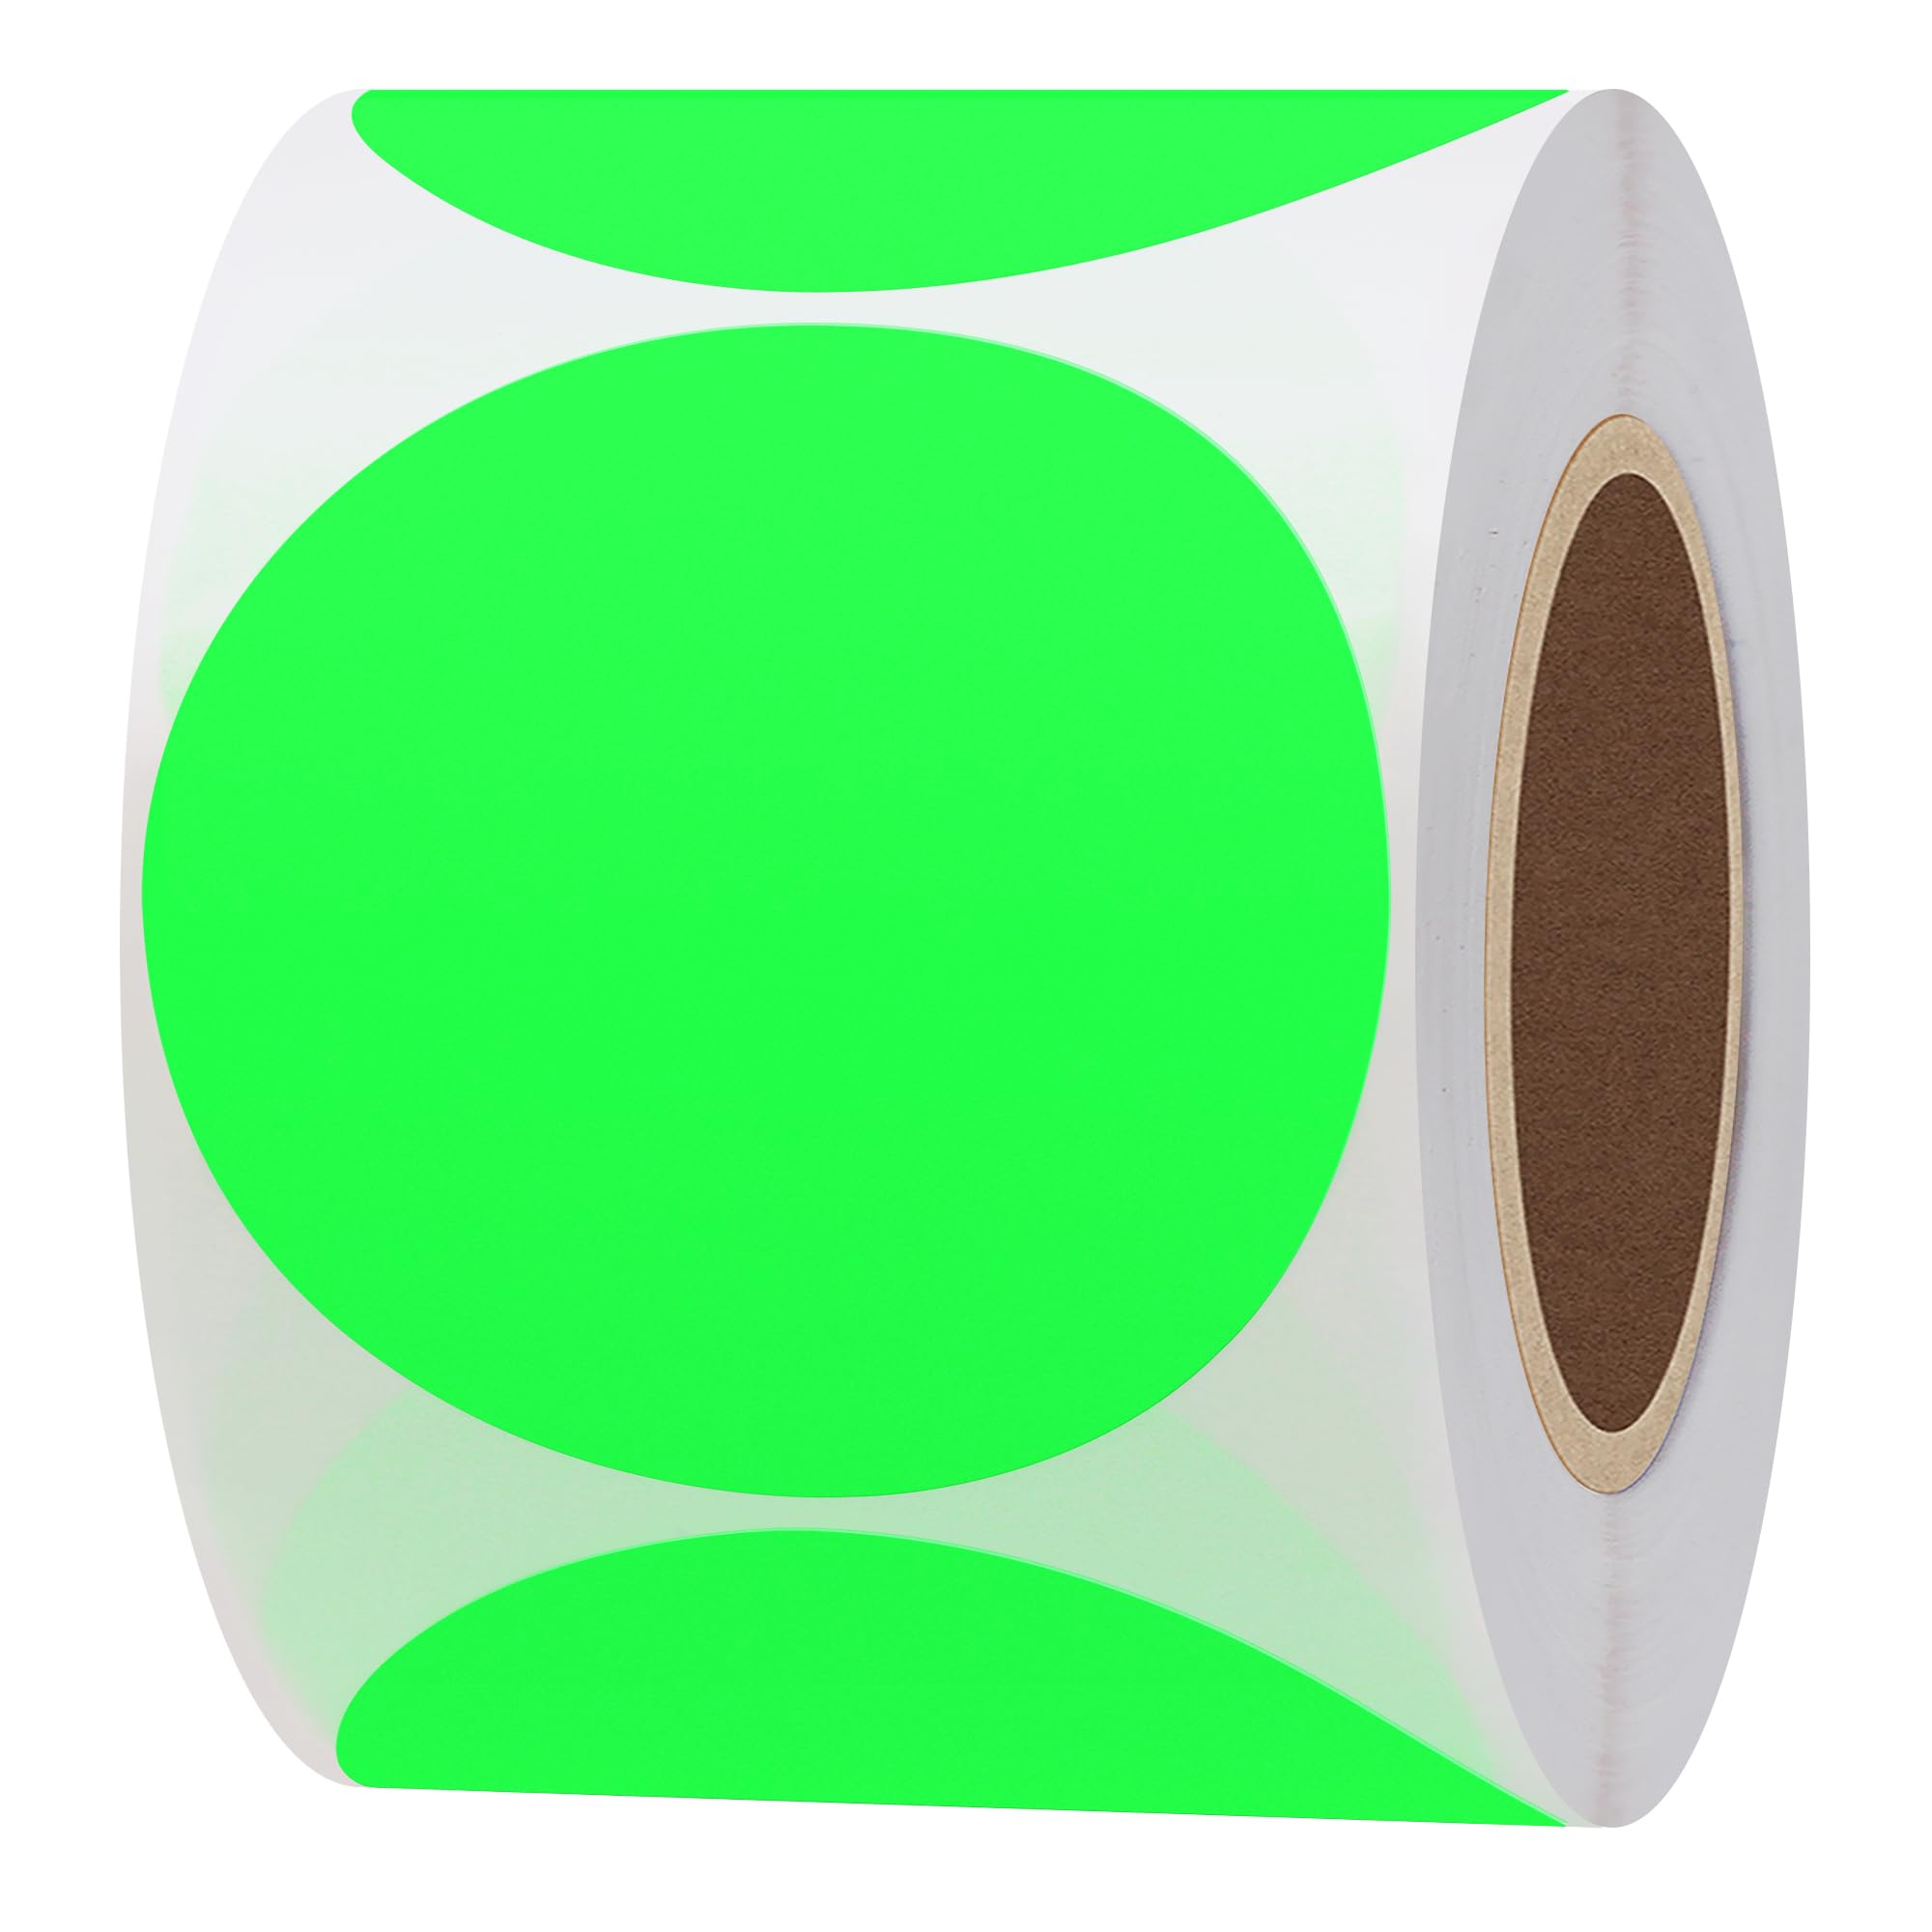 Hybsk 2 Inch Fluorescent Green Blank Target Pasters for Shooting 300 Adhesive Target Stickers Per Roll (Fluorescent Green)